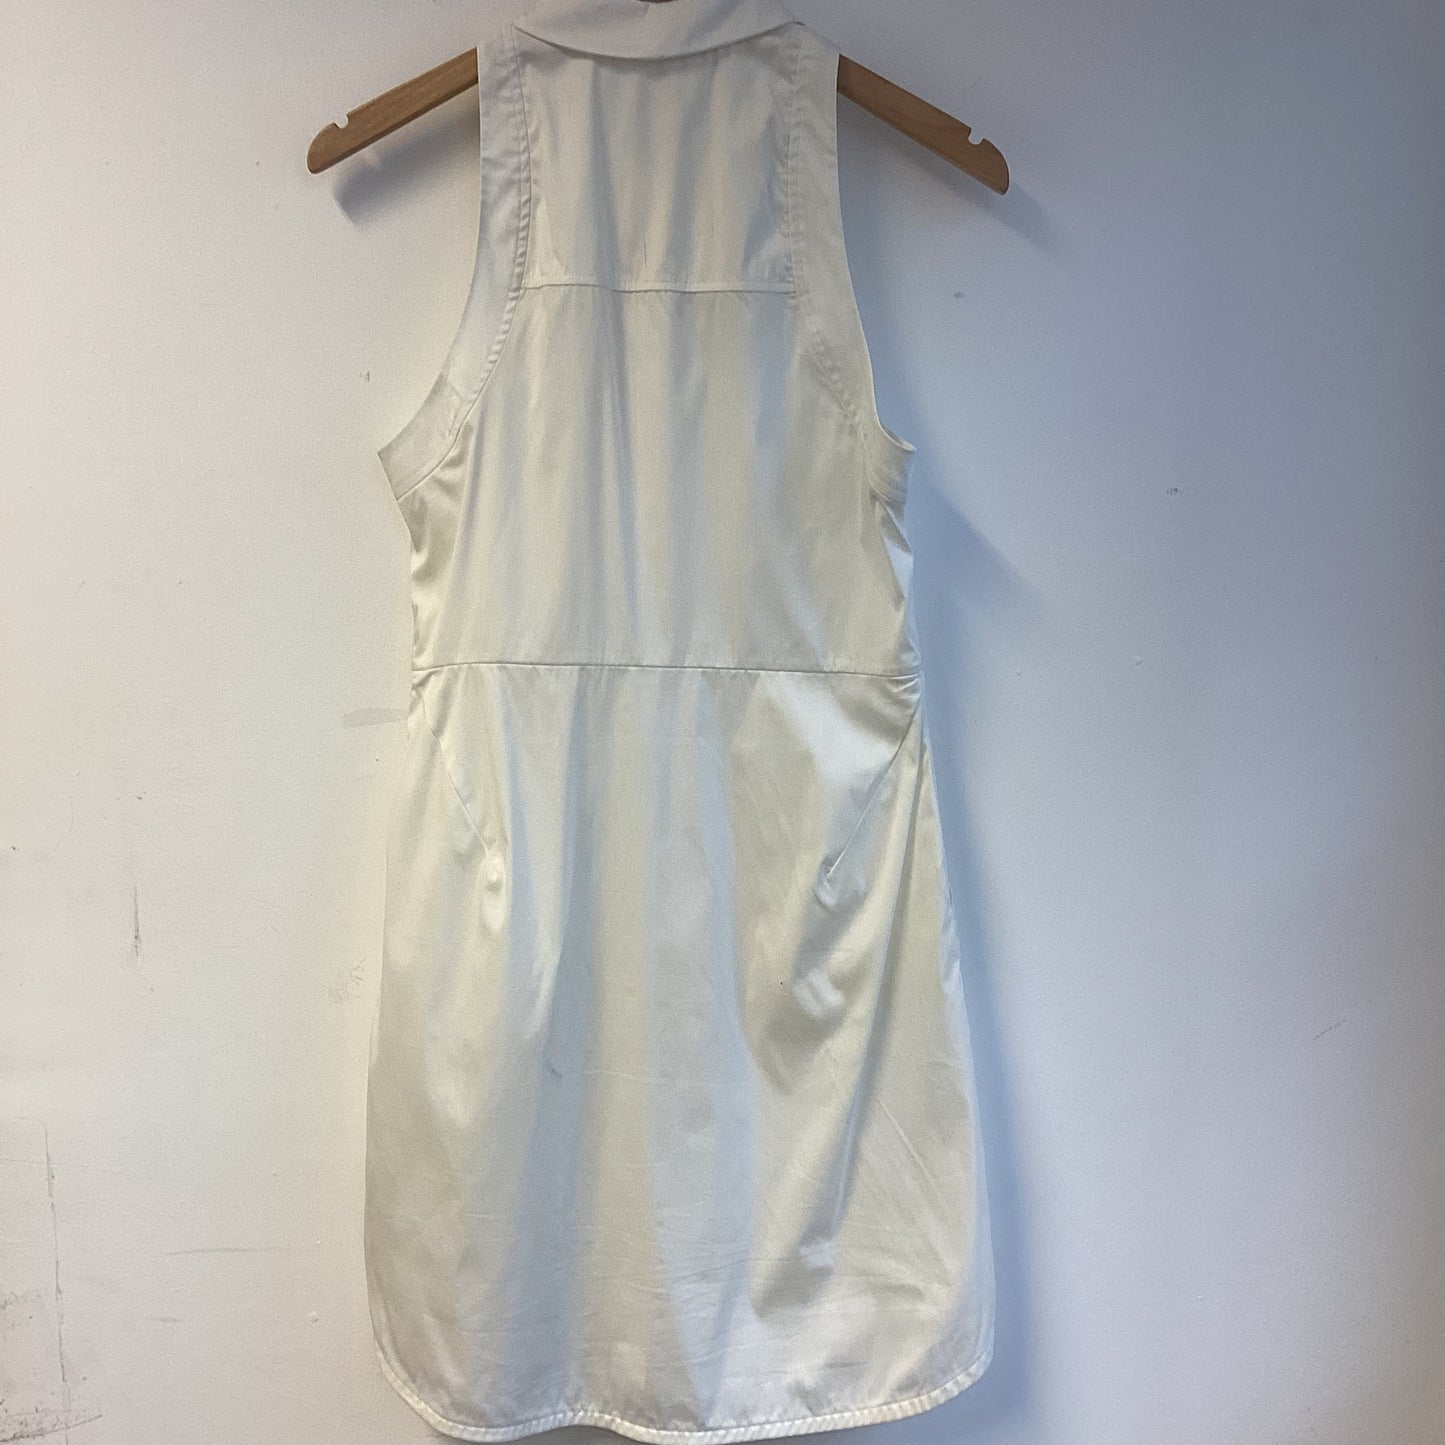 BNWT All Saints White Cotton Dress with Pockets Size 10